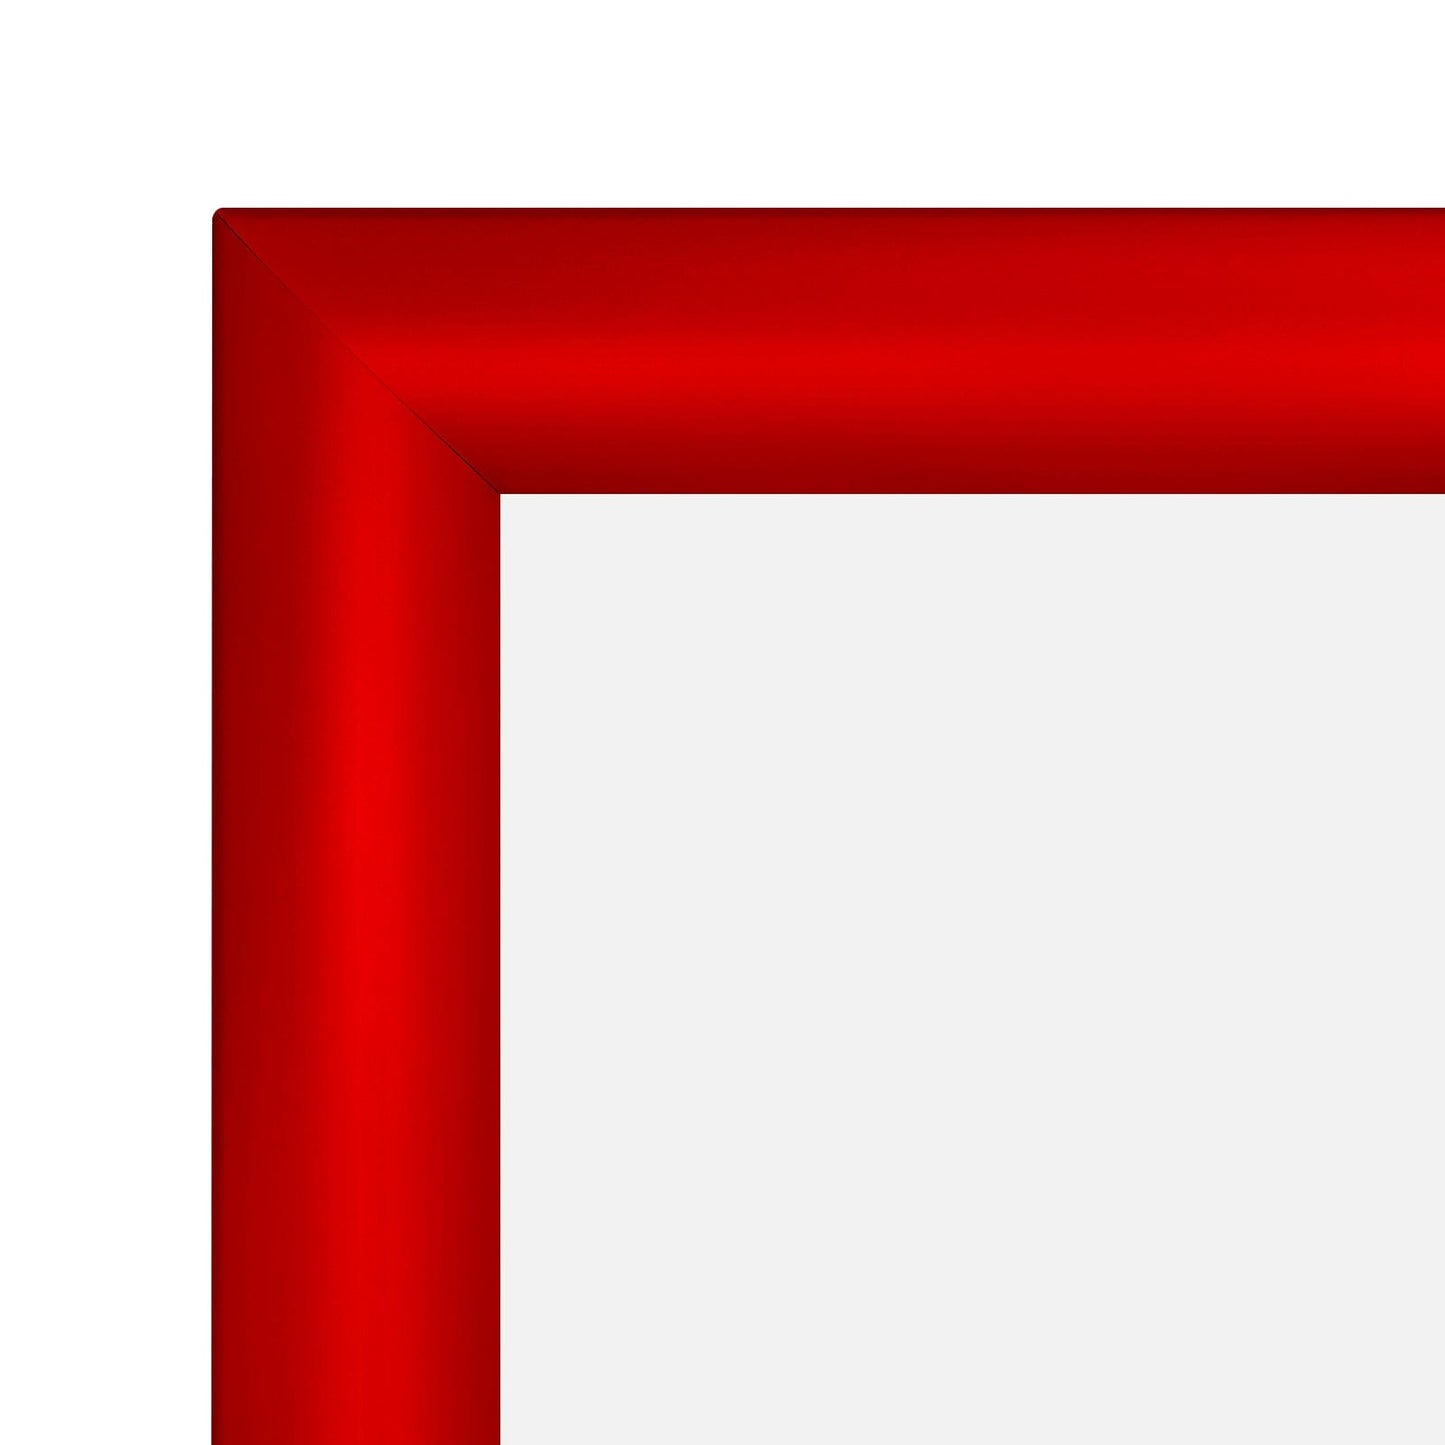 12x20 Red SnapeZo® Snap Frame - 1.2" Profile - Snap Frames Direct